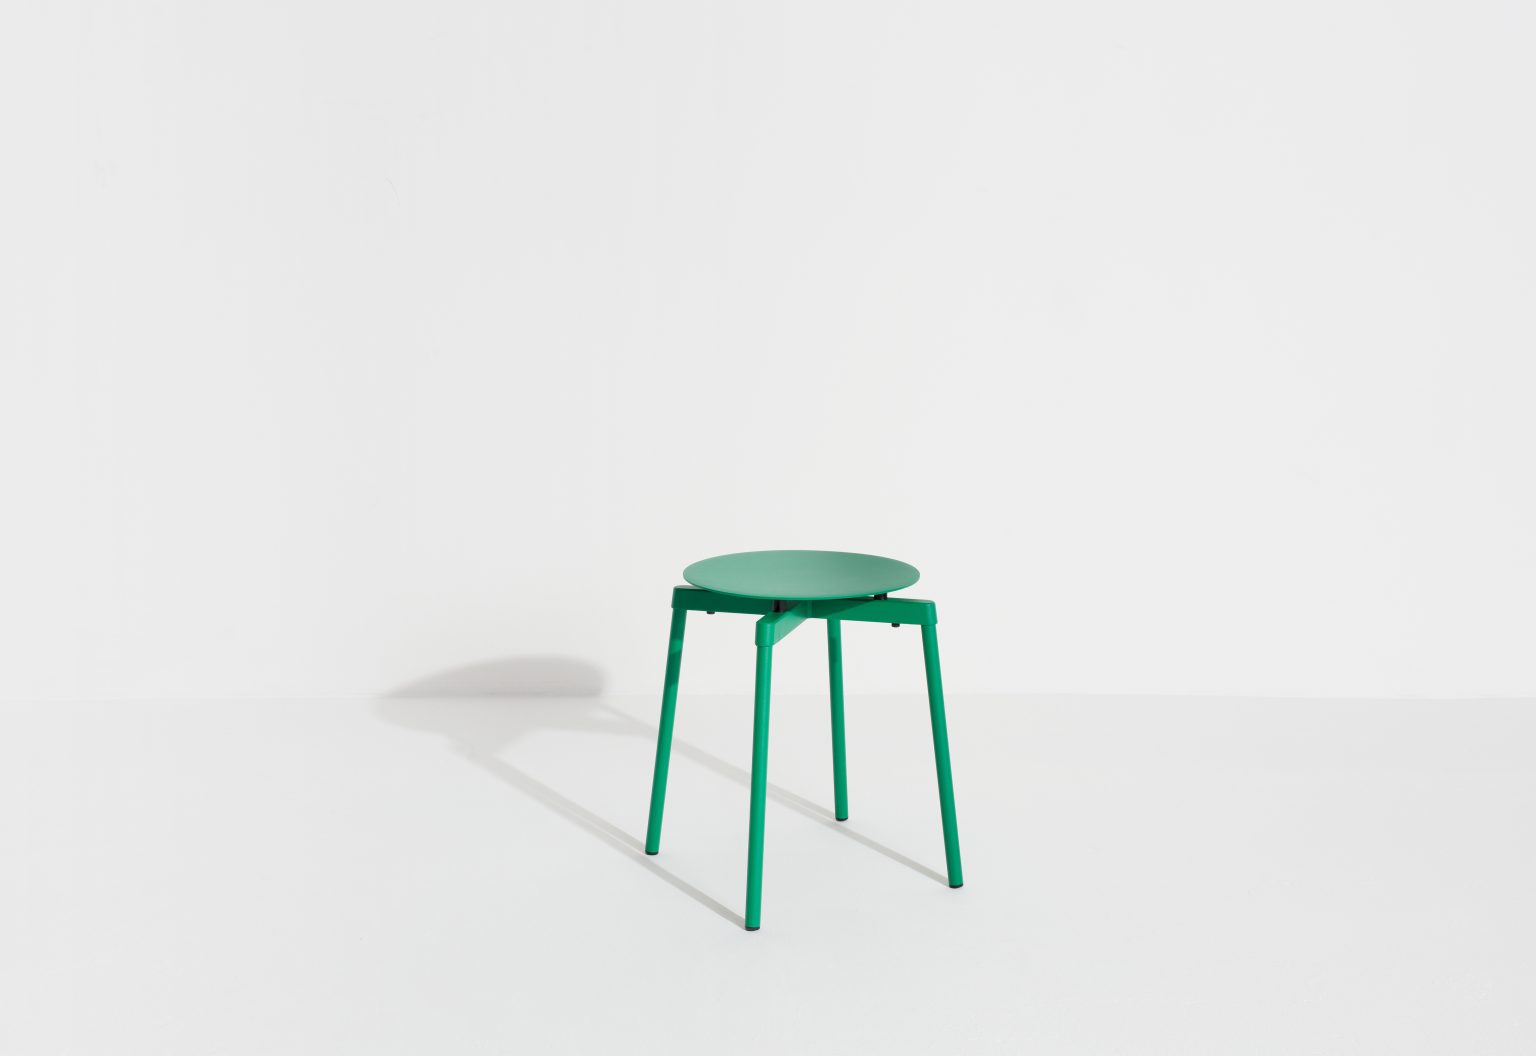 Biennale Interieur - Belgium's leading design and interior event - M0810503_fromme_stool_mintgreen_©pf_packshot_hd-2.jpg